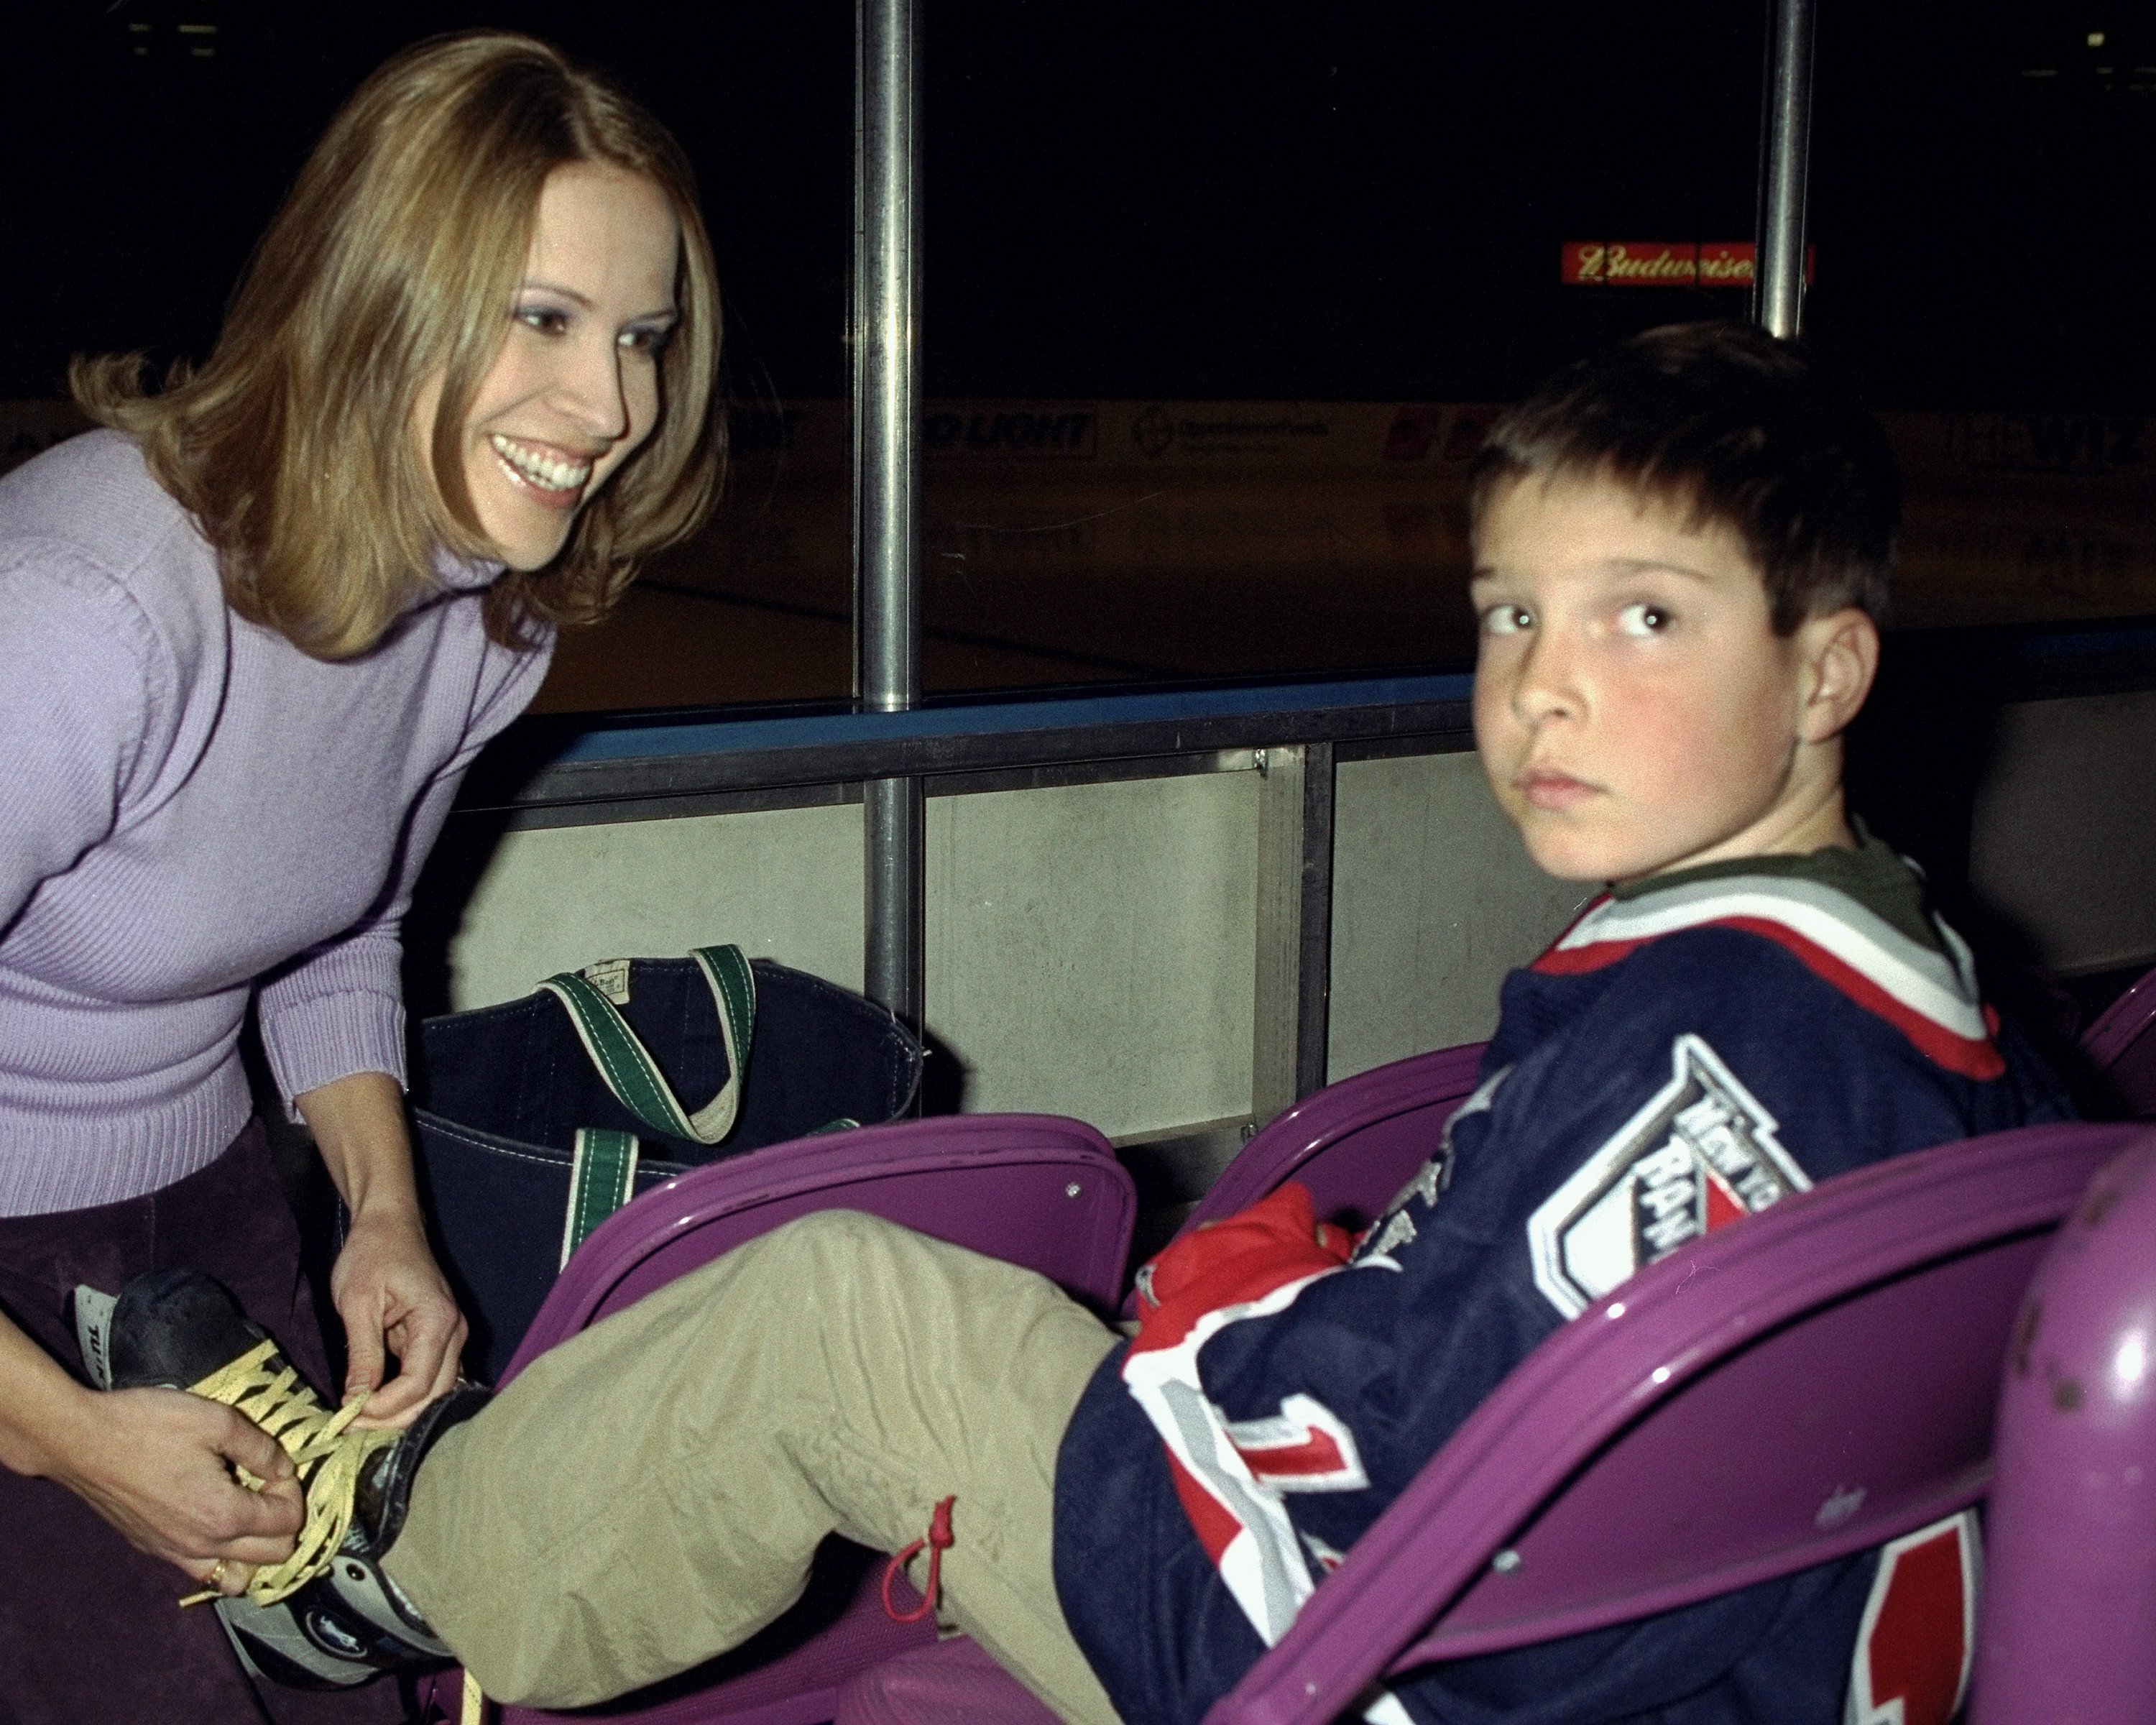 Dana Reeve and her son Will Reeve at Madison Square in New York 2001. | Source: Getty Images